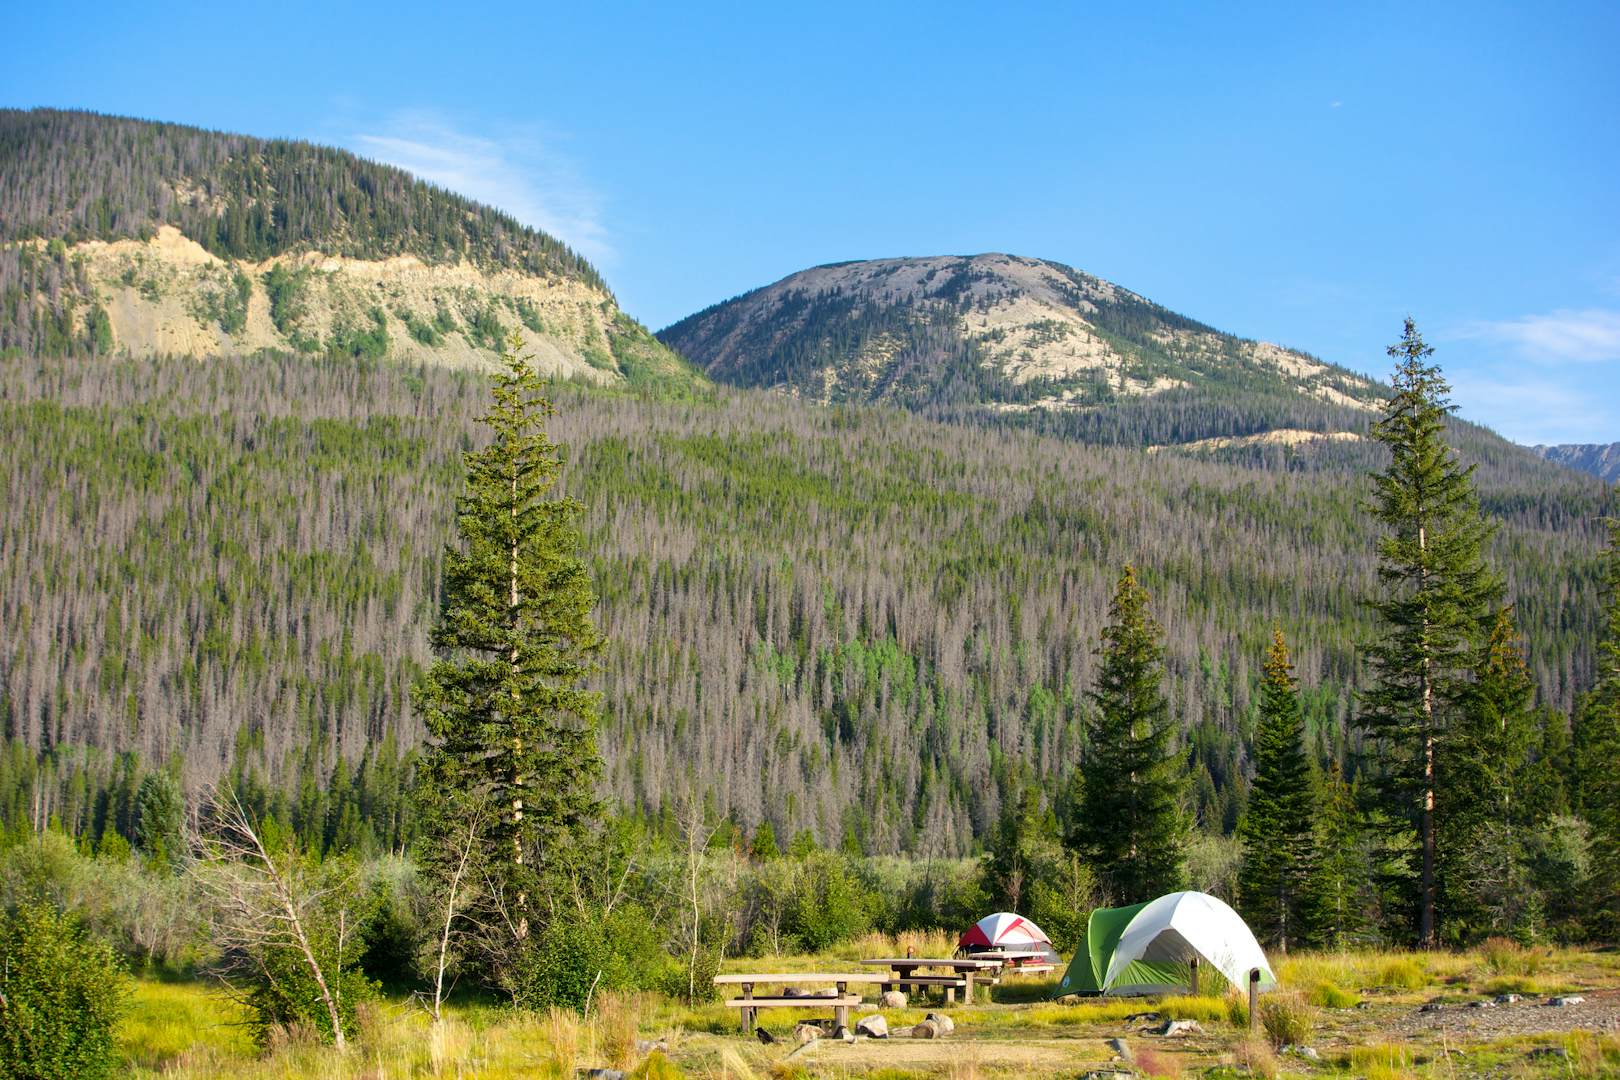 5 of the best places to camp near major US cities